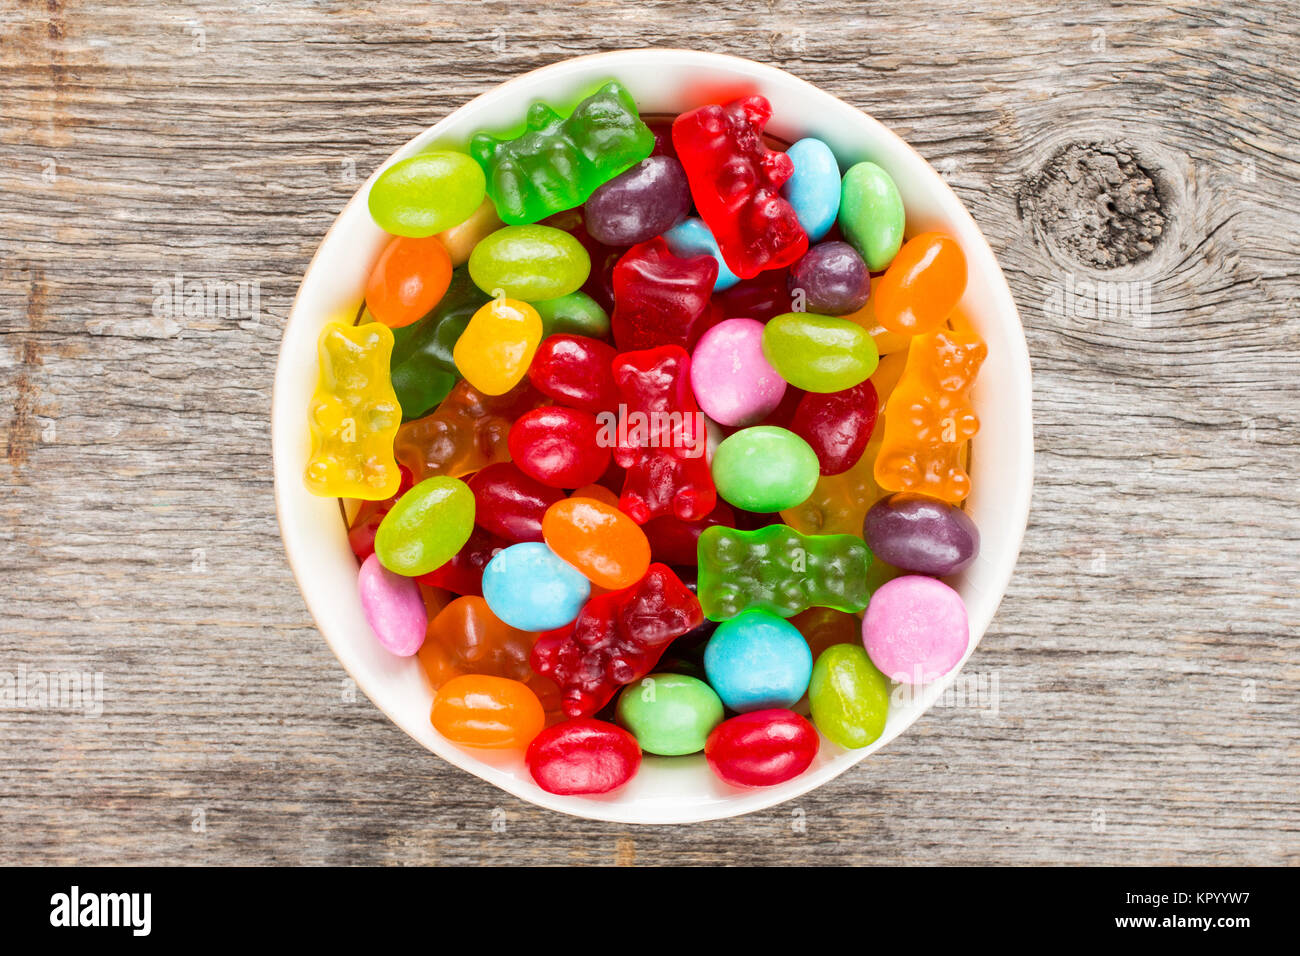 Bowl full of colorful candies. Stock Photo